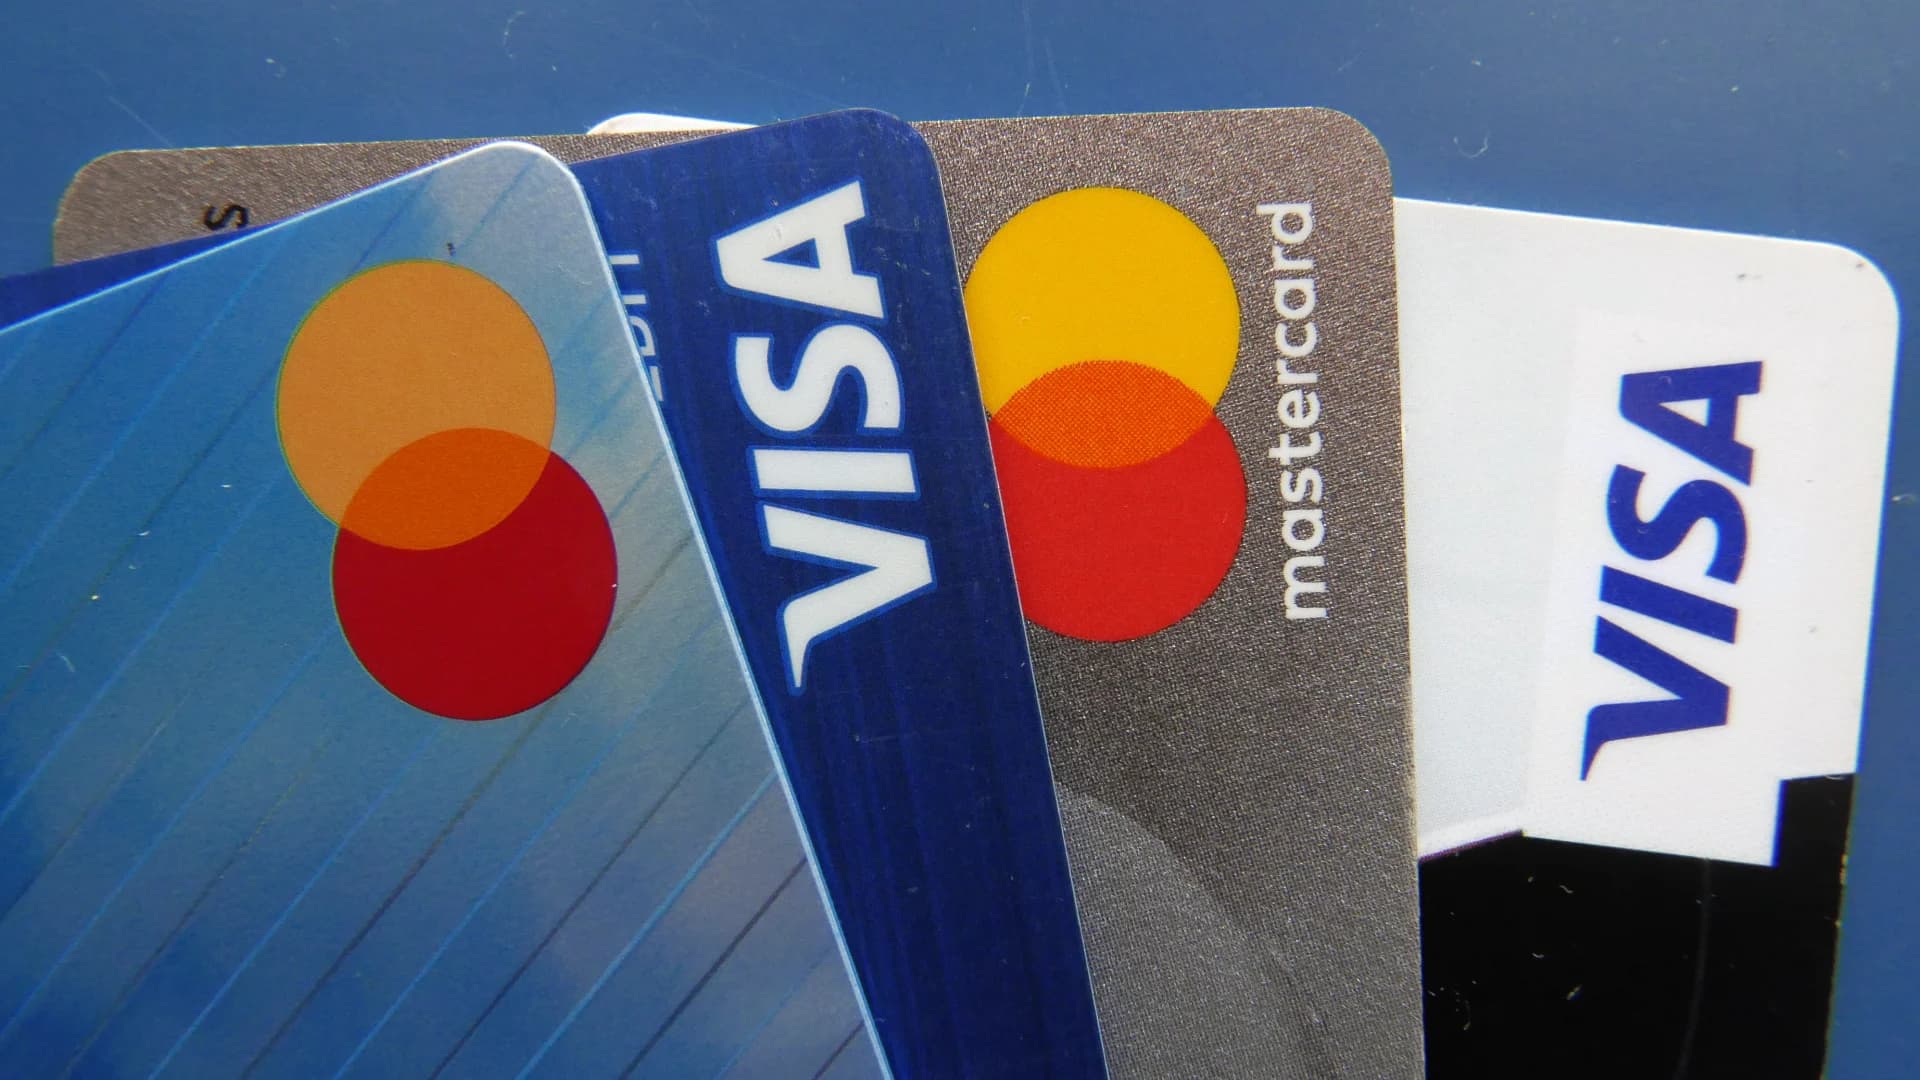 New York stores are now required to post the extra charges for paying with a credit card